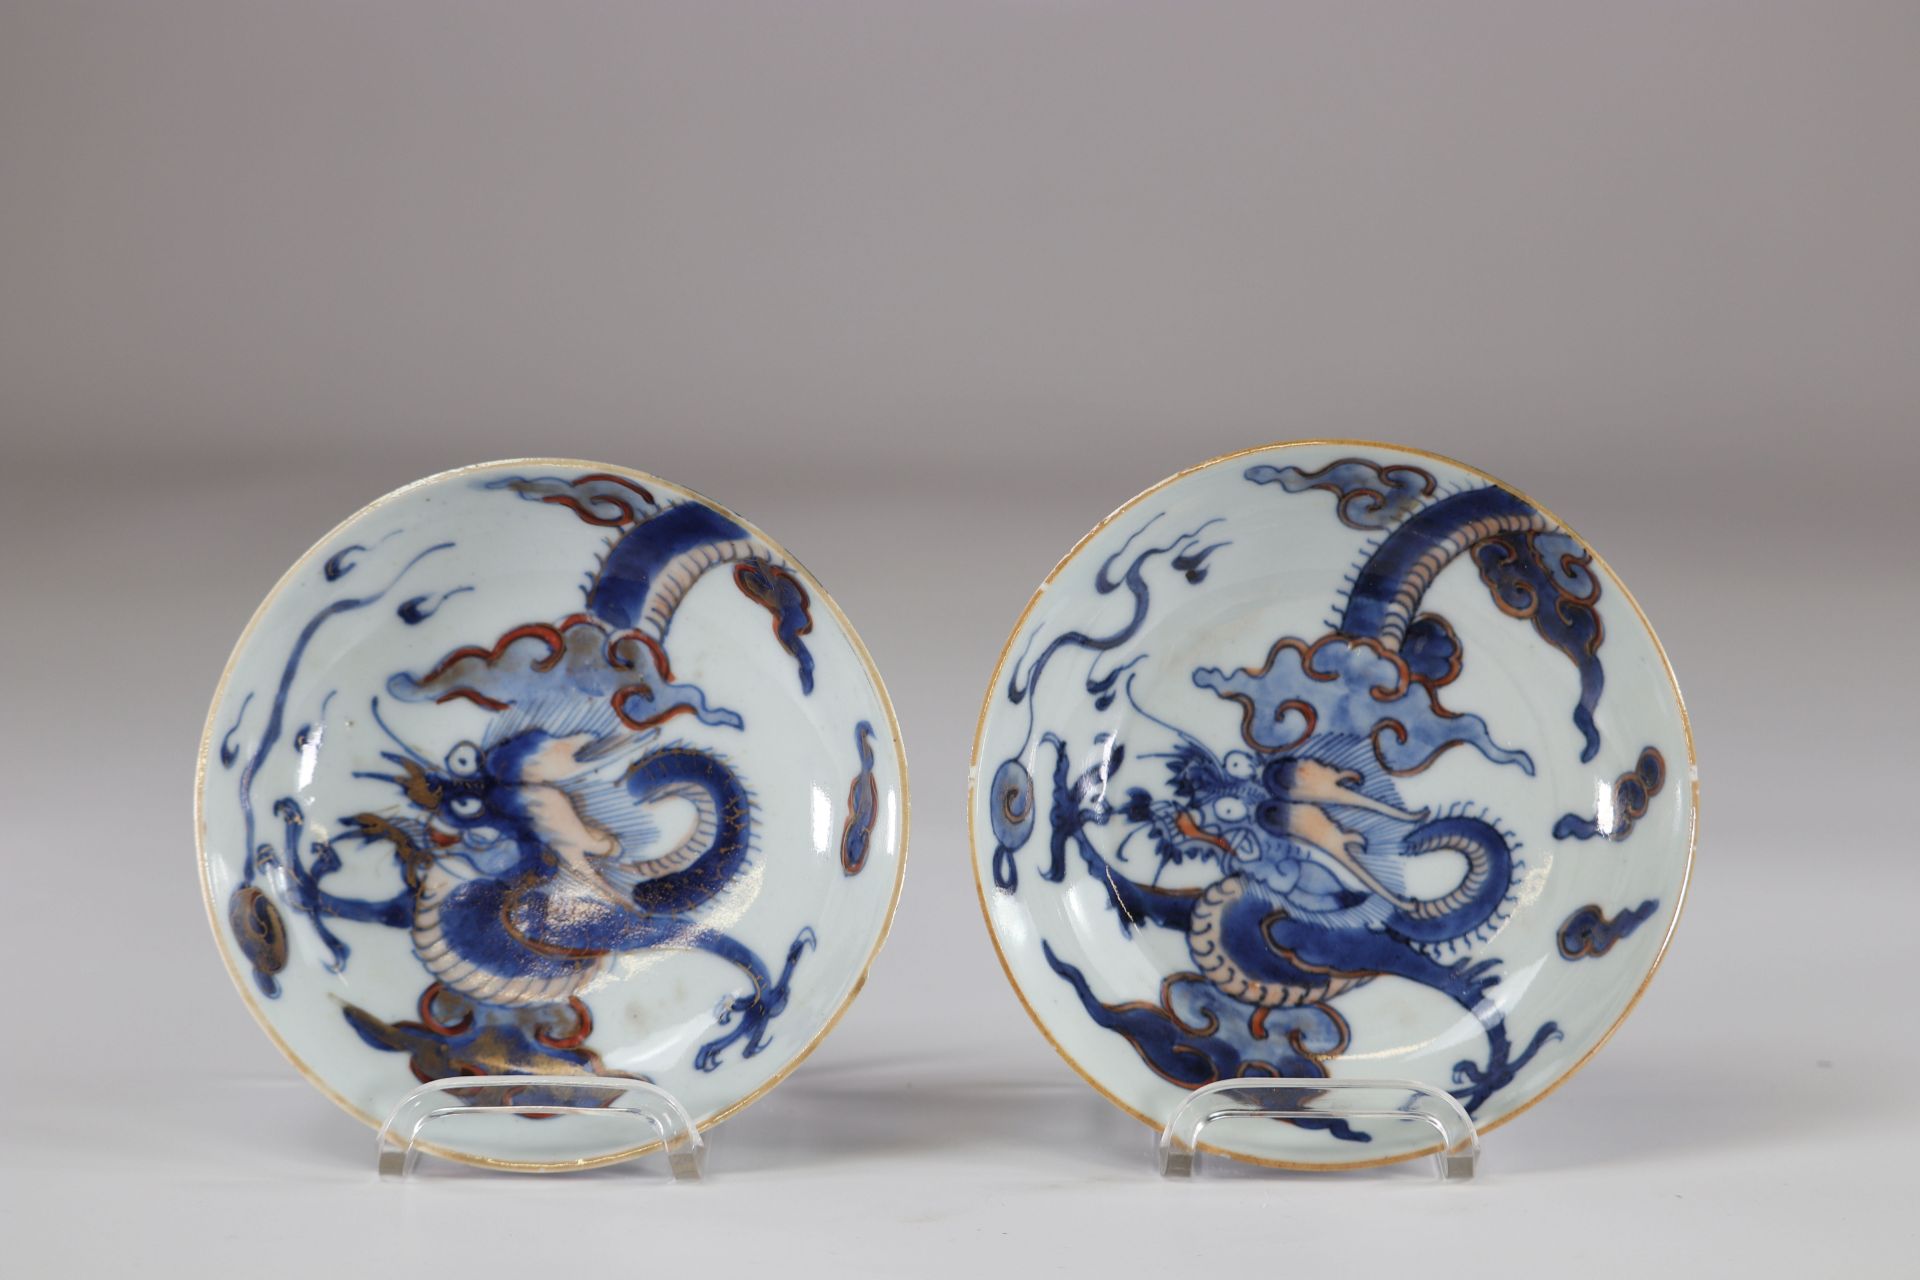 Asia set of 2 plates with dragon decoration